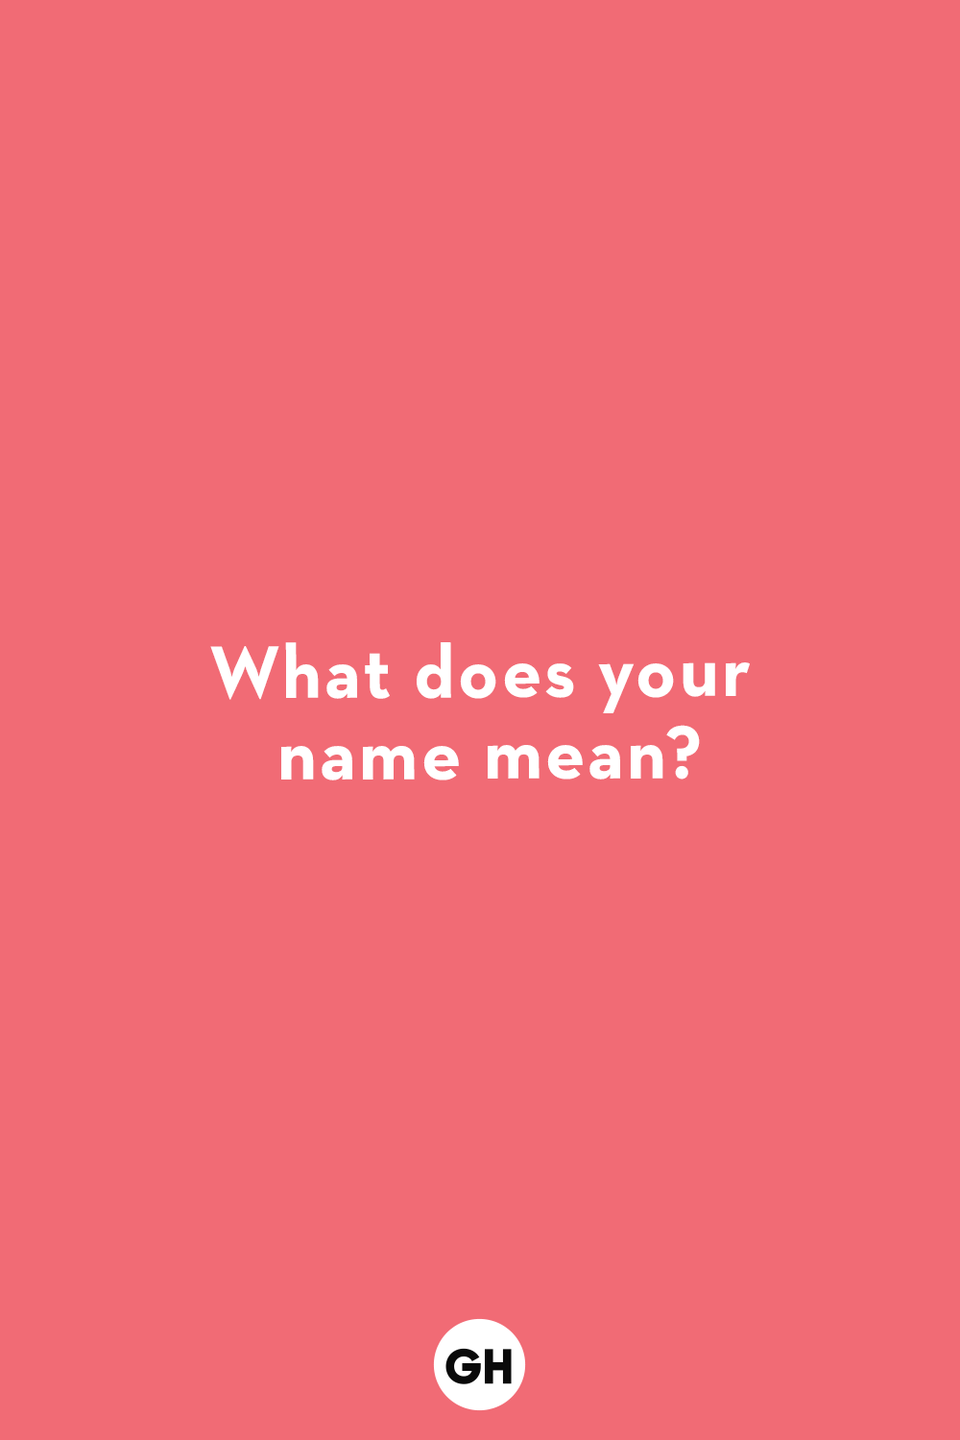 a question card for kids asks what does your name mean